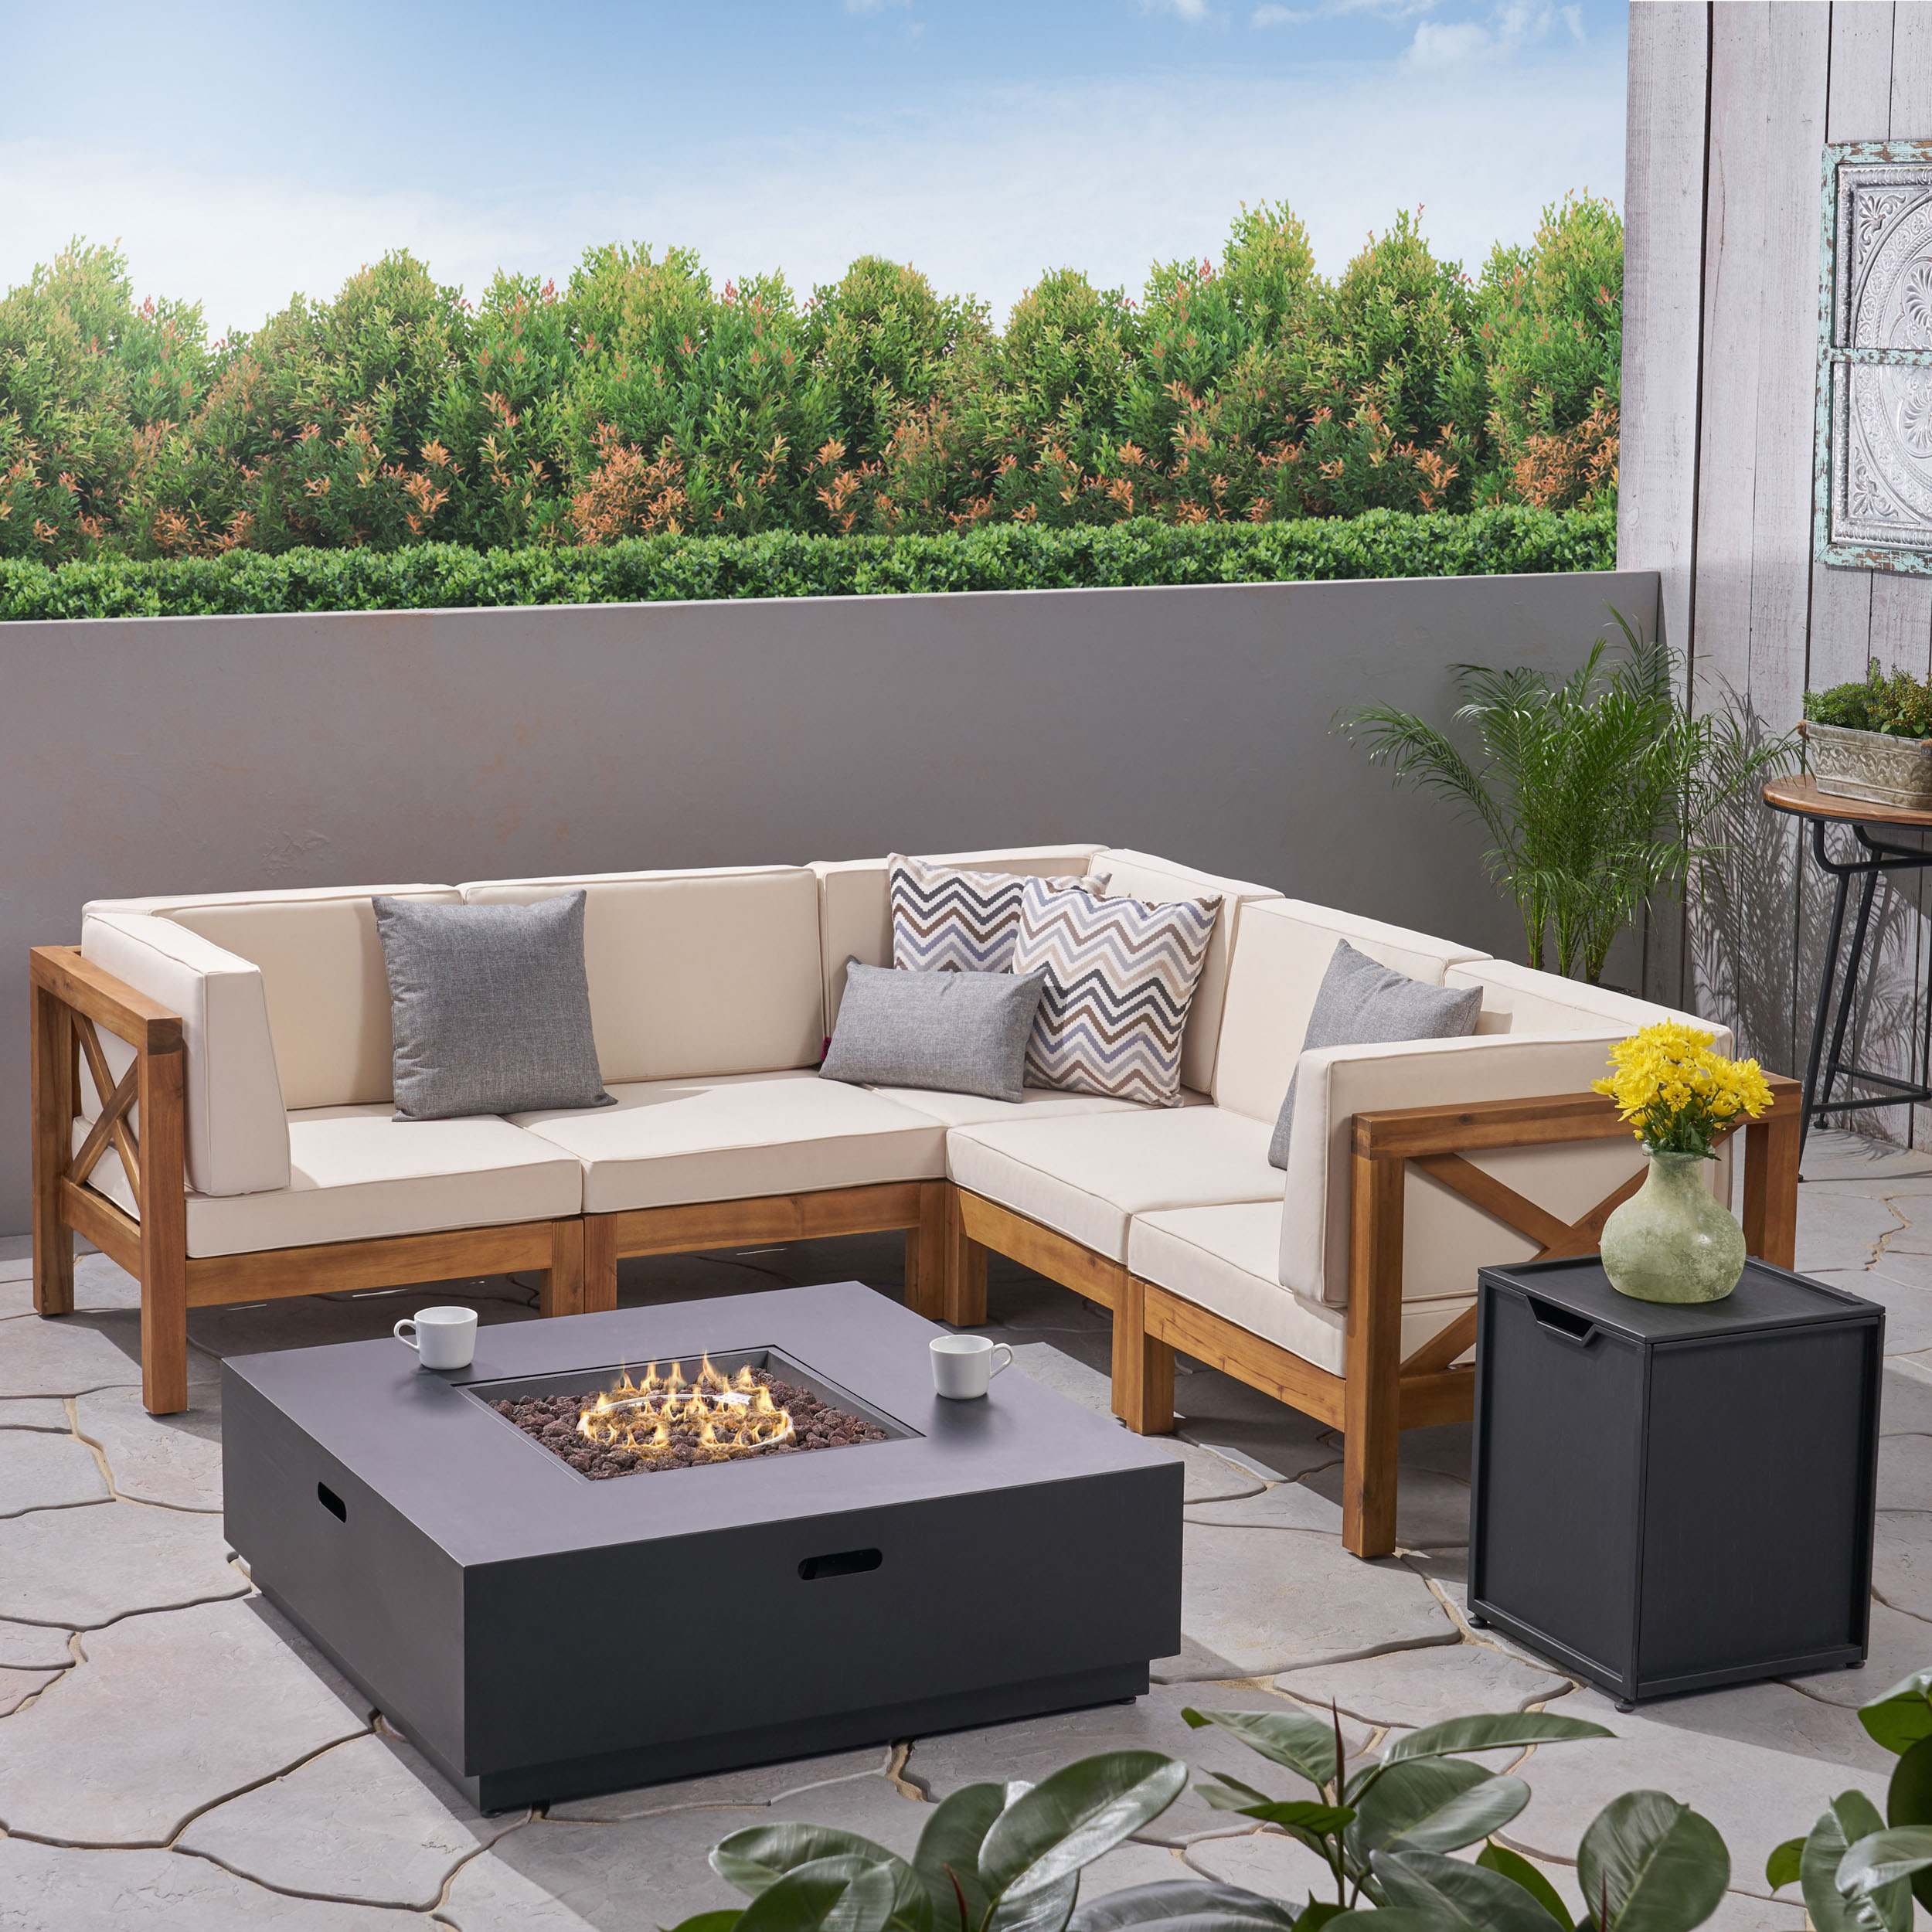 Gina Outdoor Acacia Wood 5 Seater Sectional Sofa Set With Fire Pit - Teak/Beige/Dark Gray